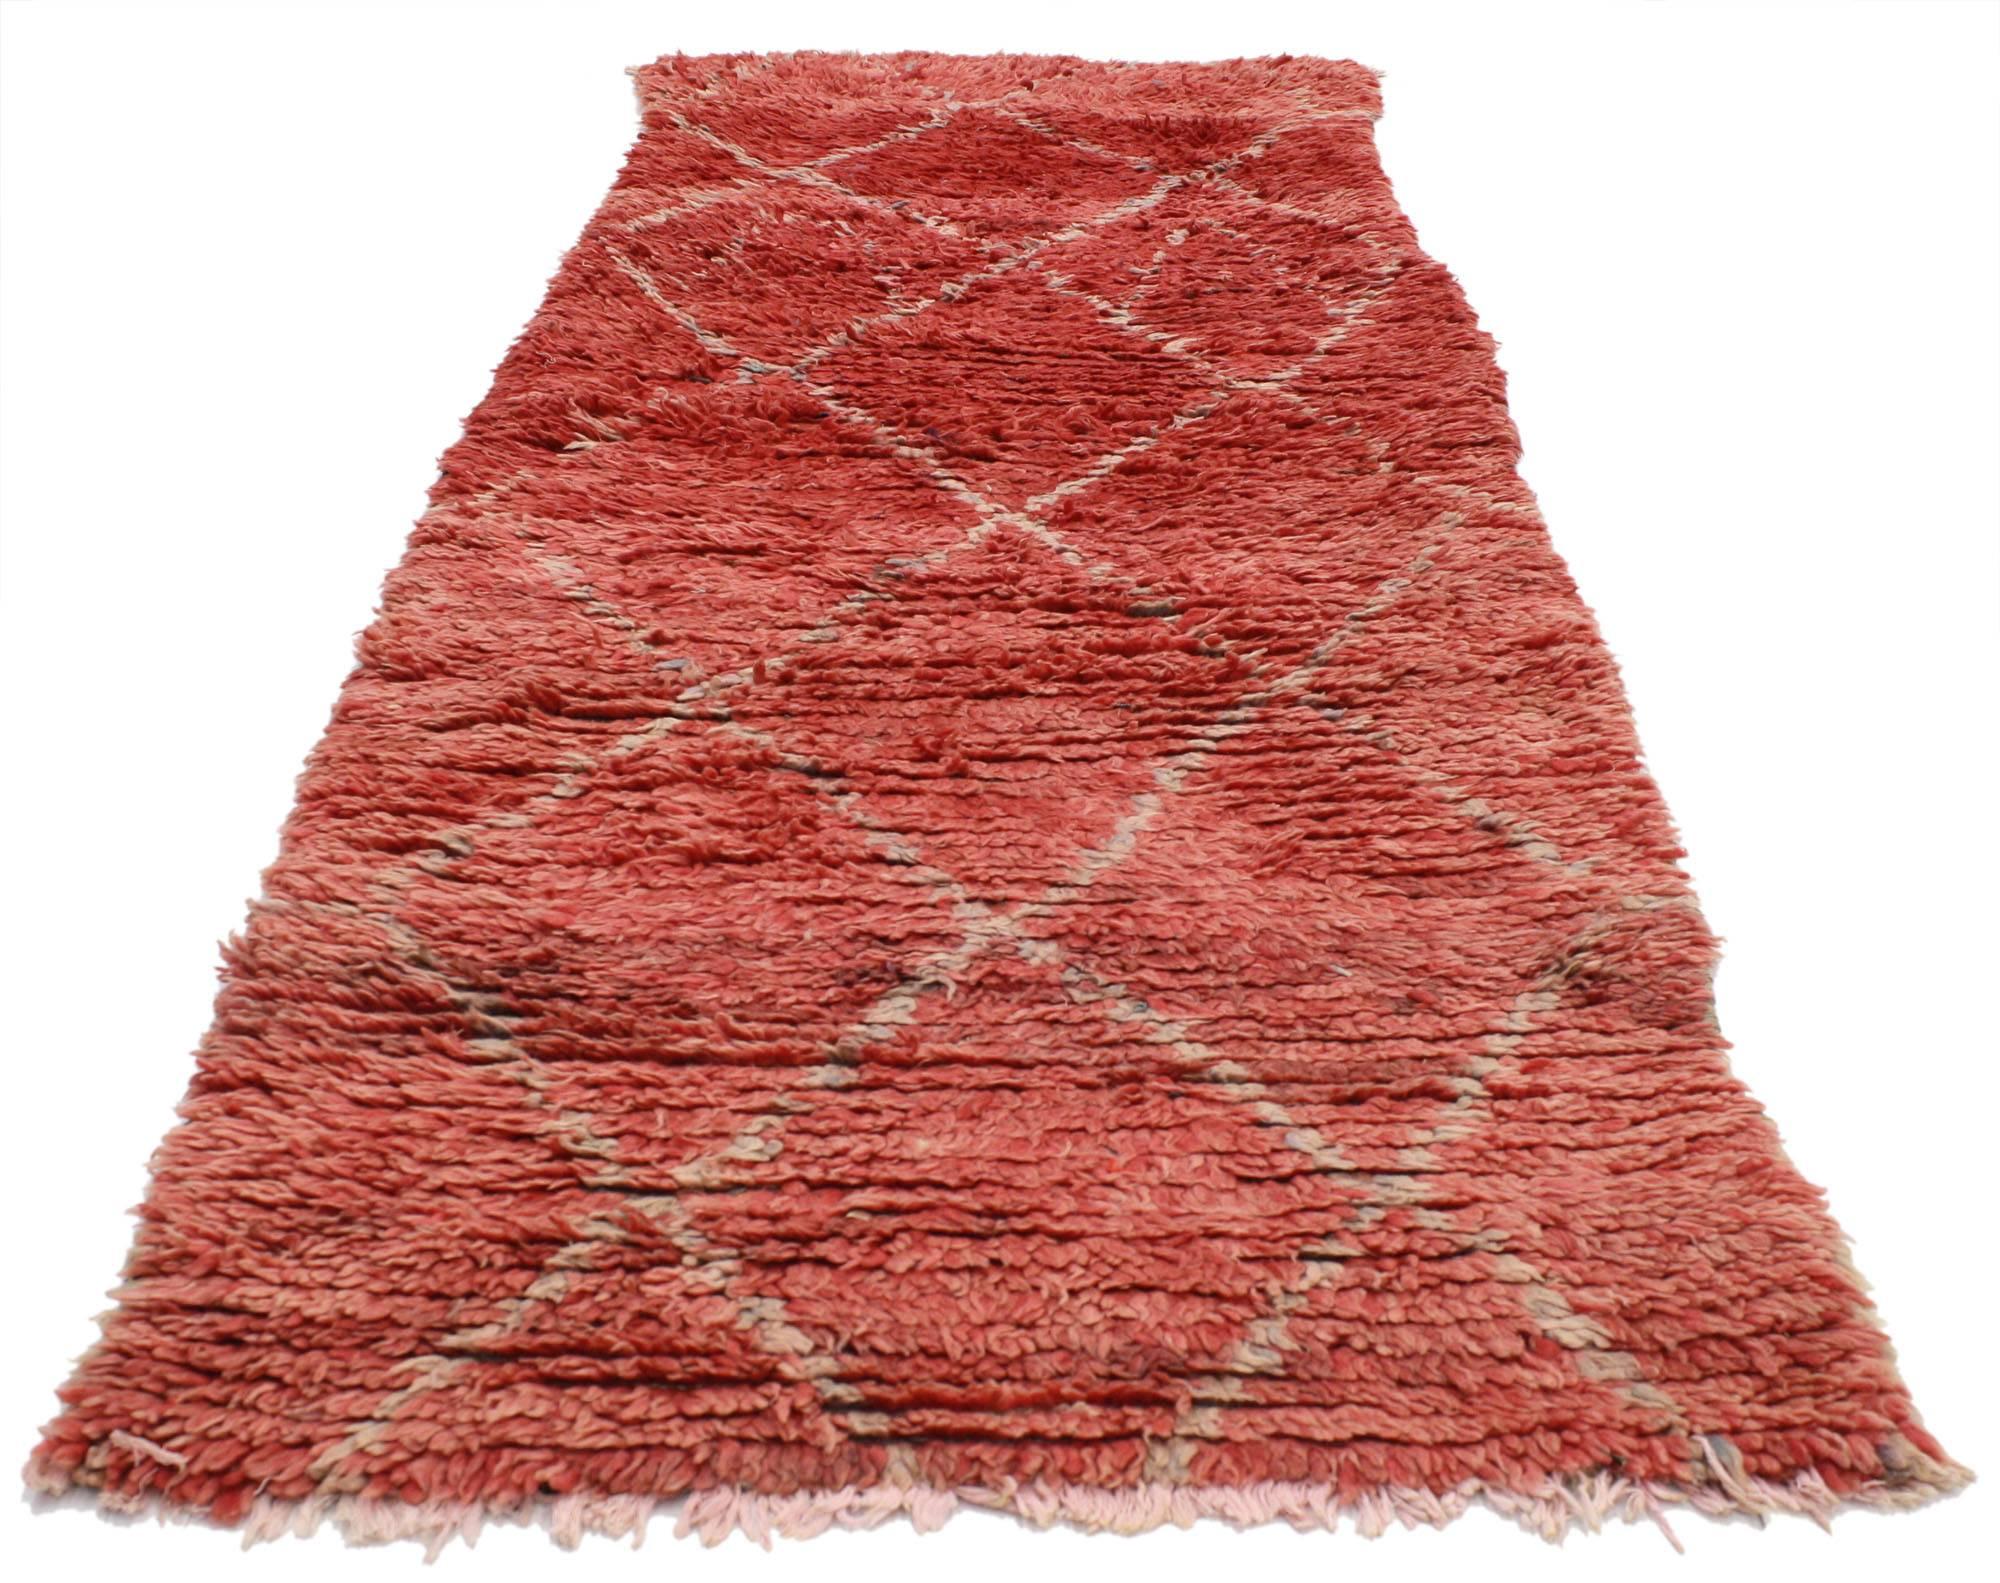 20th Century Vintage Berber Moroccan Runner with Tribal Style, Red Shag Hallway Runner